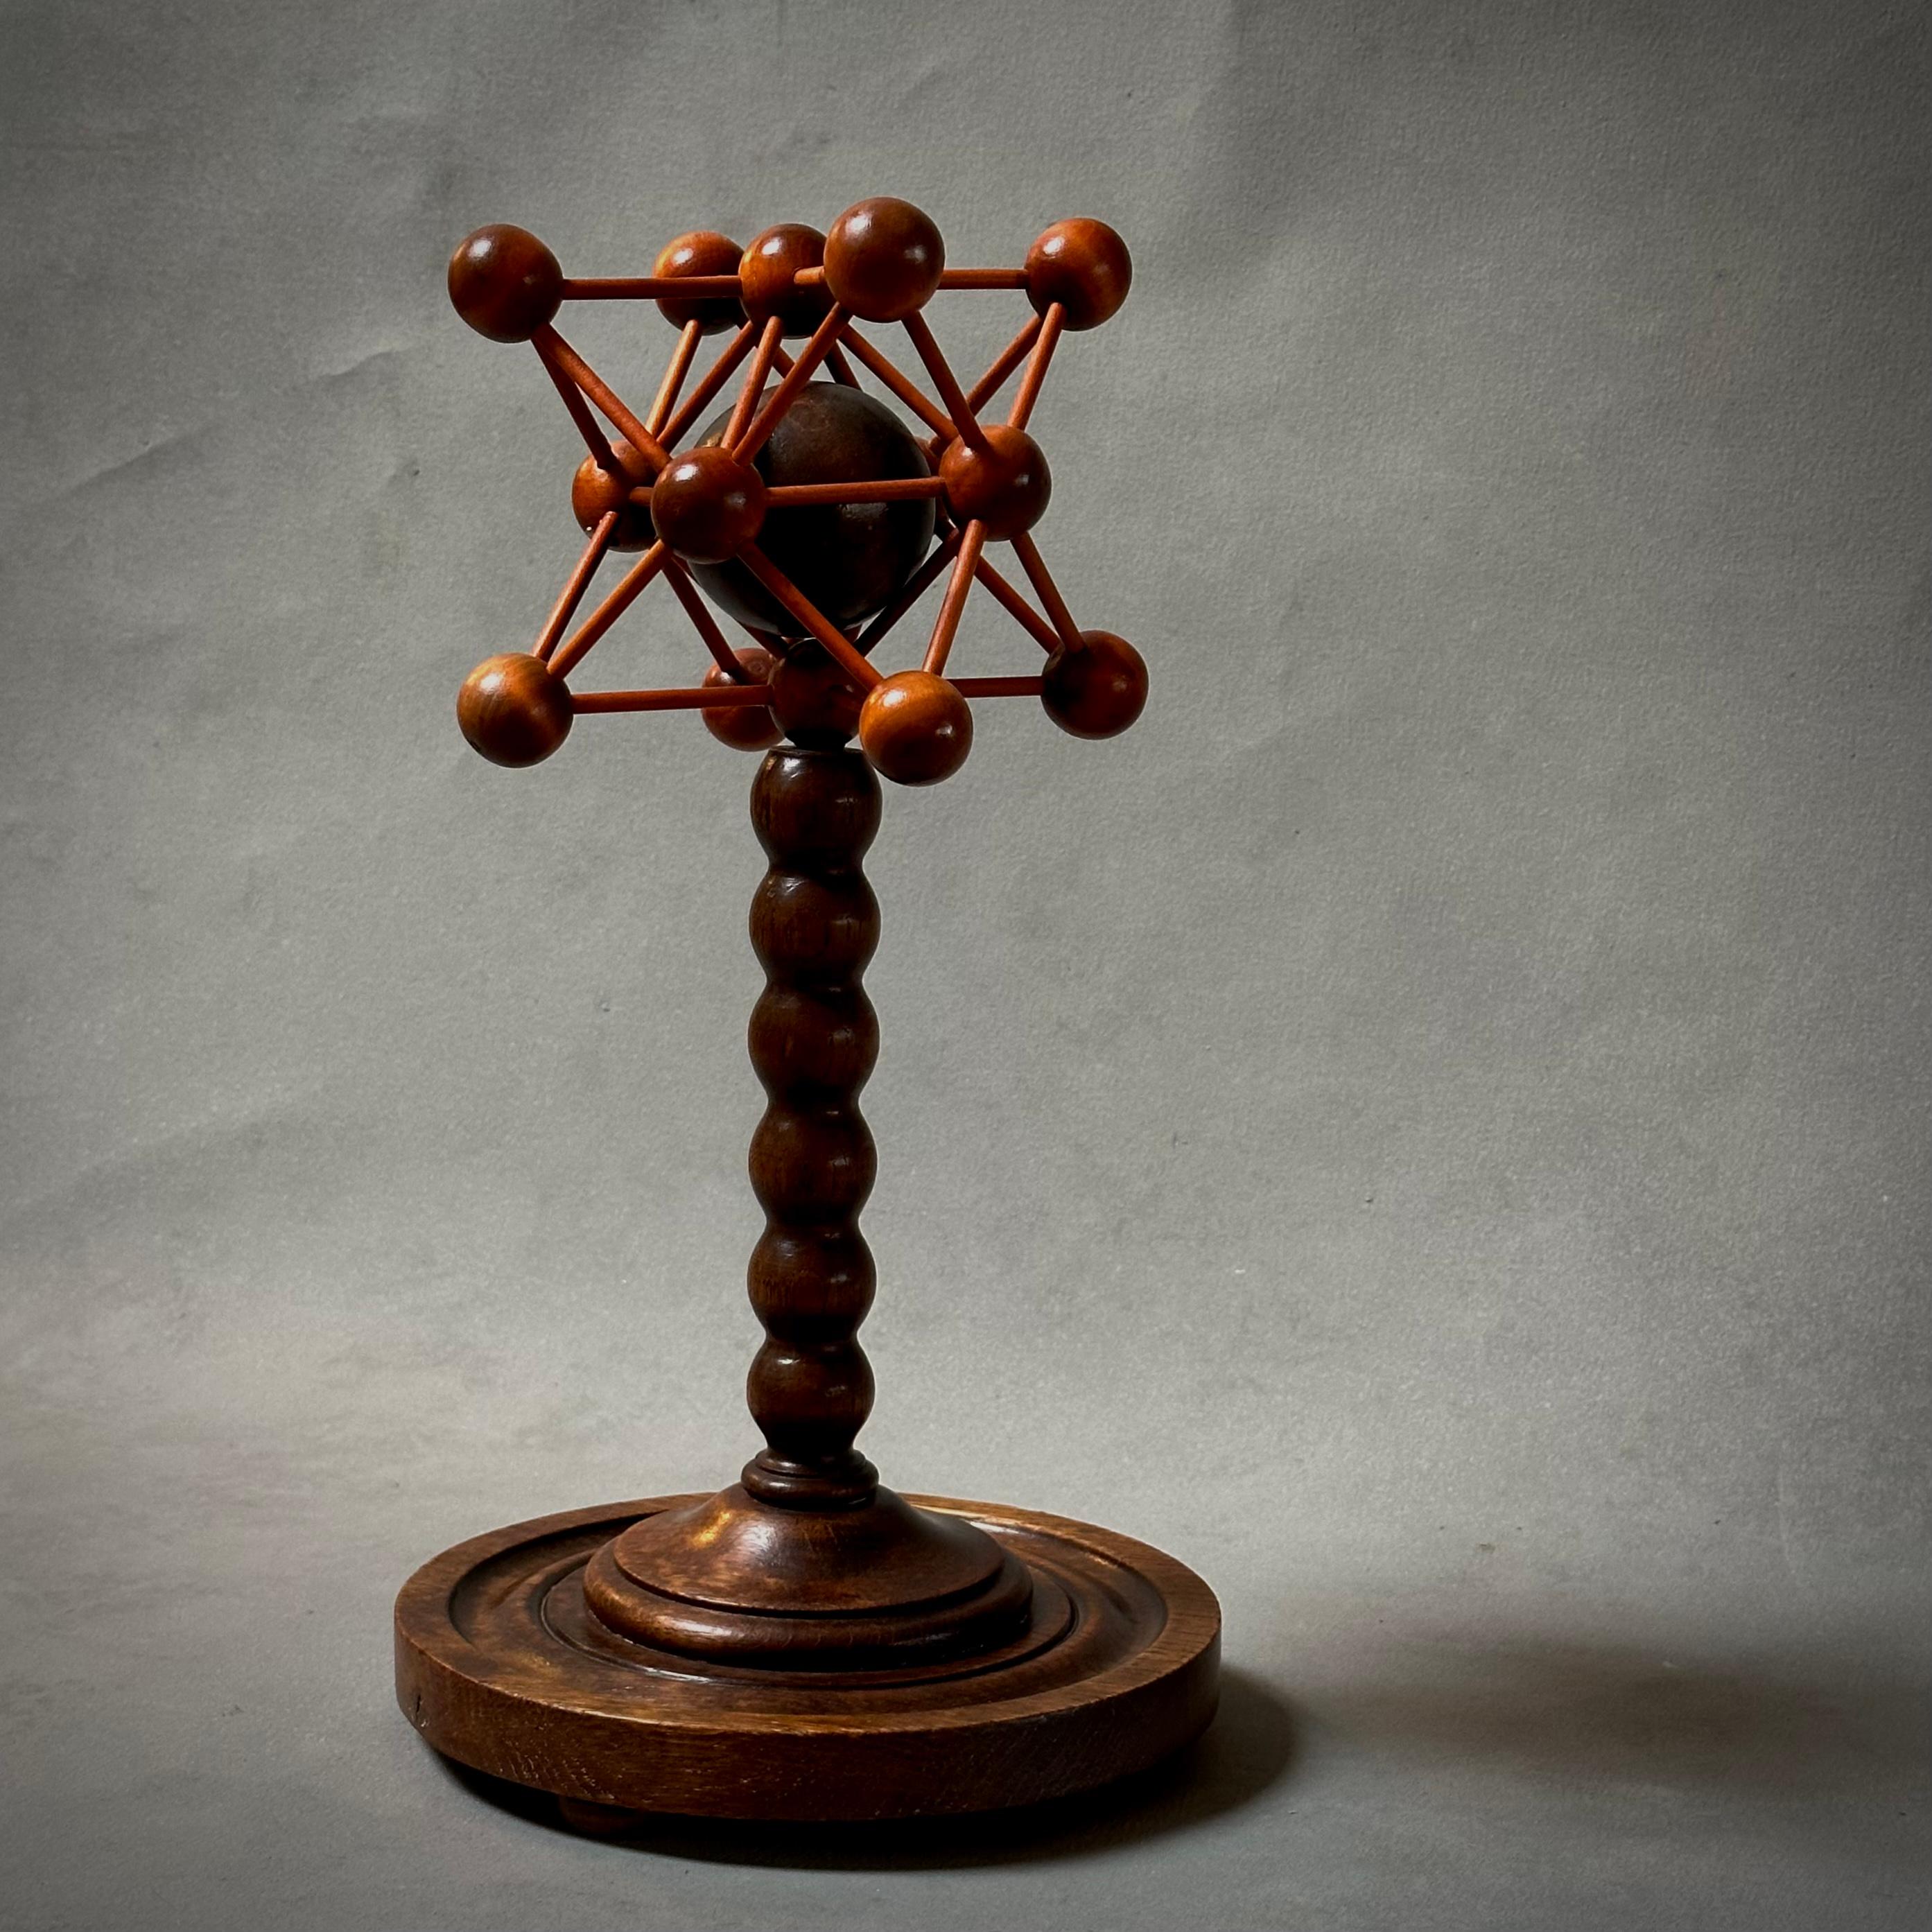 A graphic hand-carved mahogany and oak sculpture or decorative element from early 20th century France. A curious blend of modern and traditional details make for a compelling contrast. 

France, circa 1900

Dimensions: 9W x 9D x 16H.